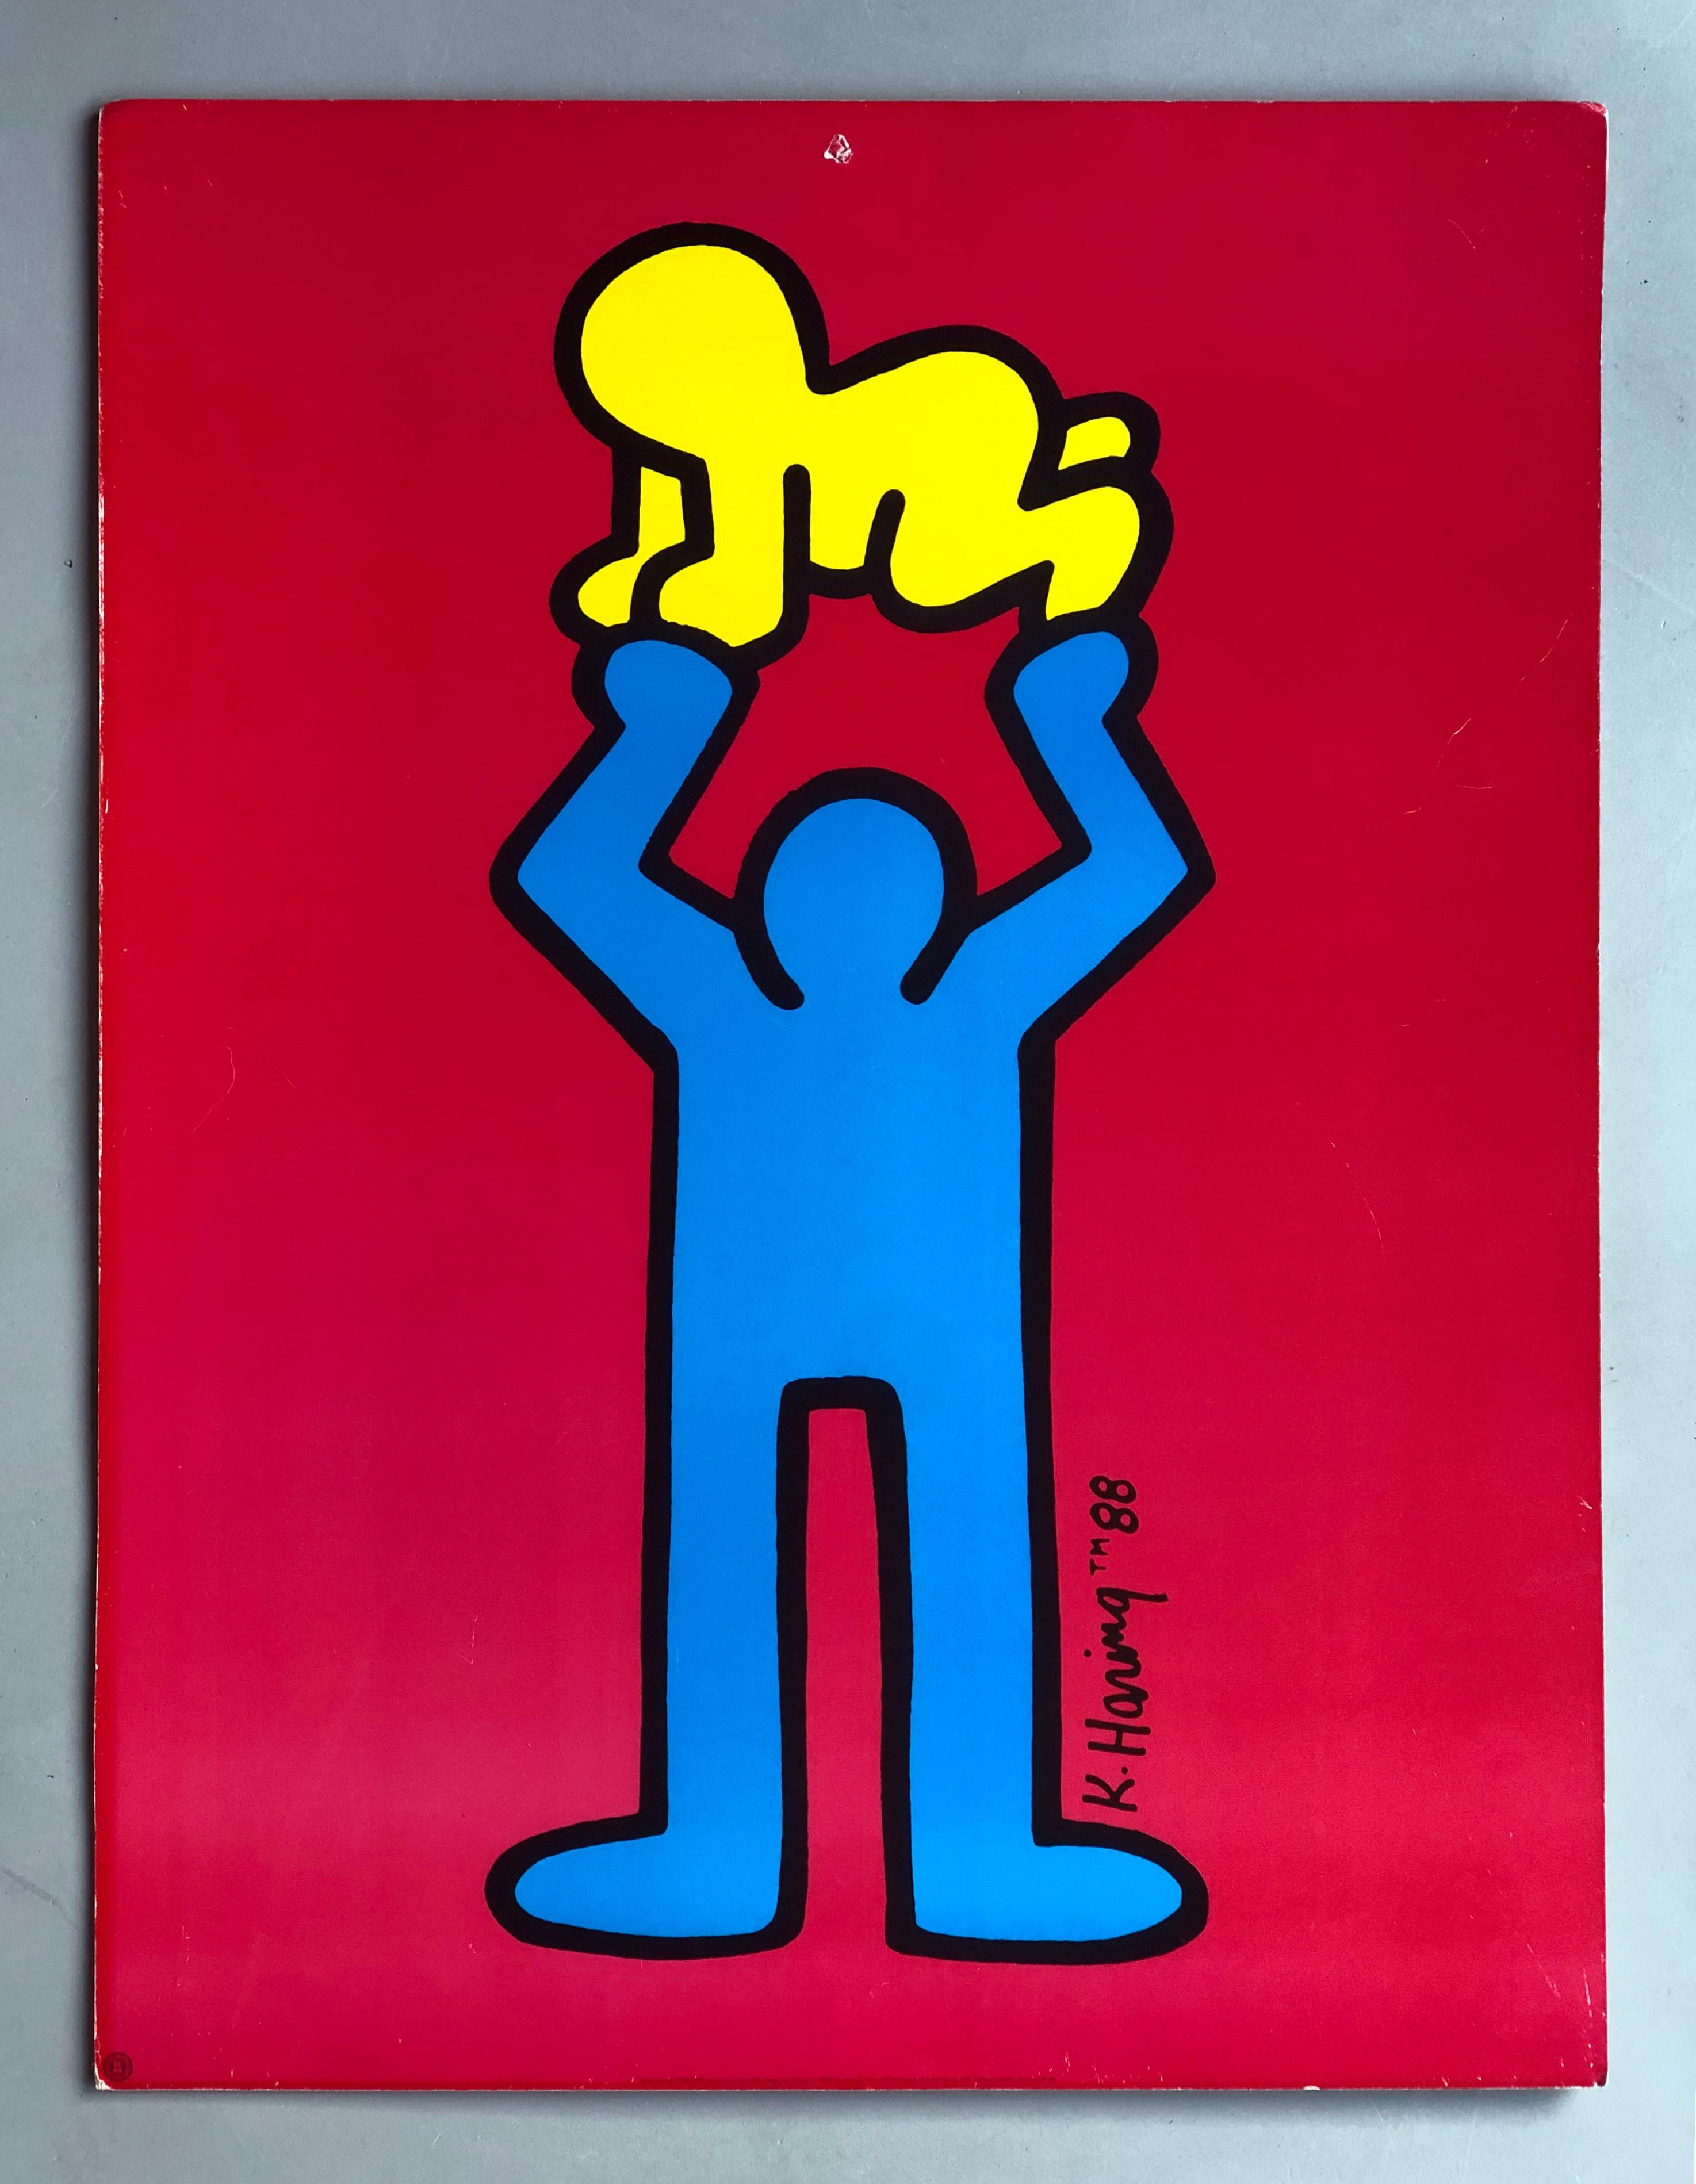 Keith Haring 1991 - Man Holding Radiant Baby - Pop Art print on thick cardboard

This impressive lithograph print showcases Keith Haring's 